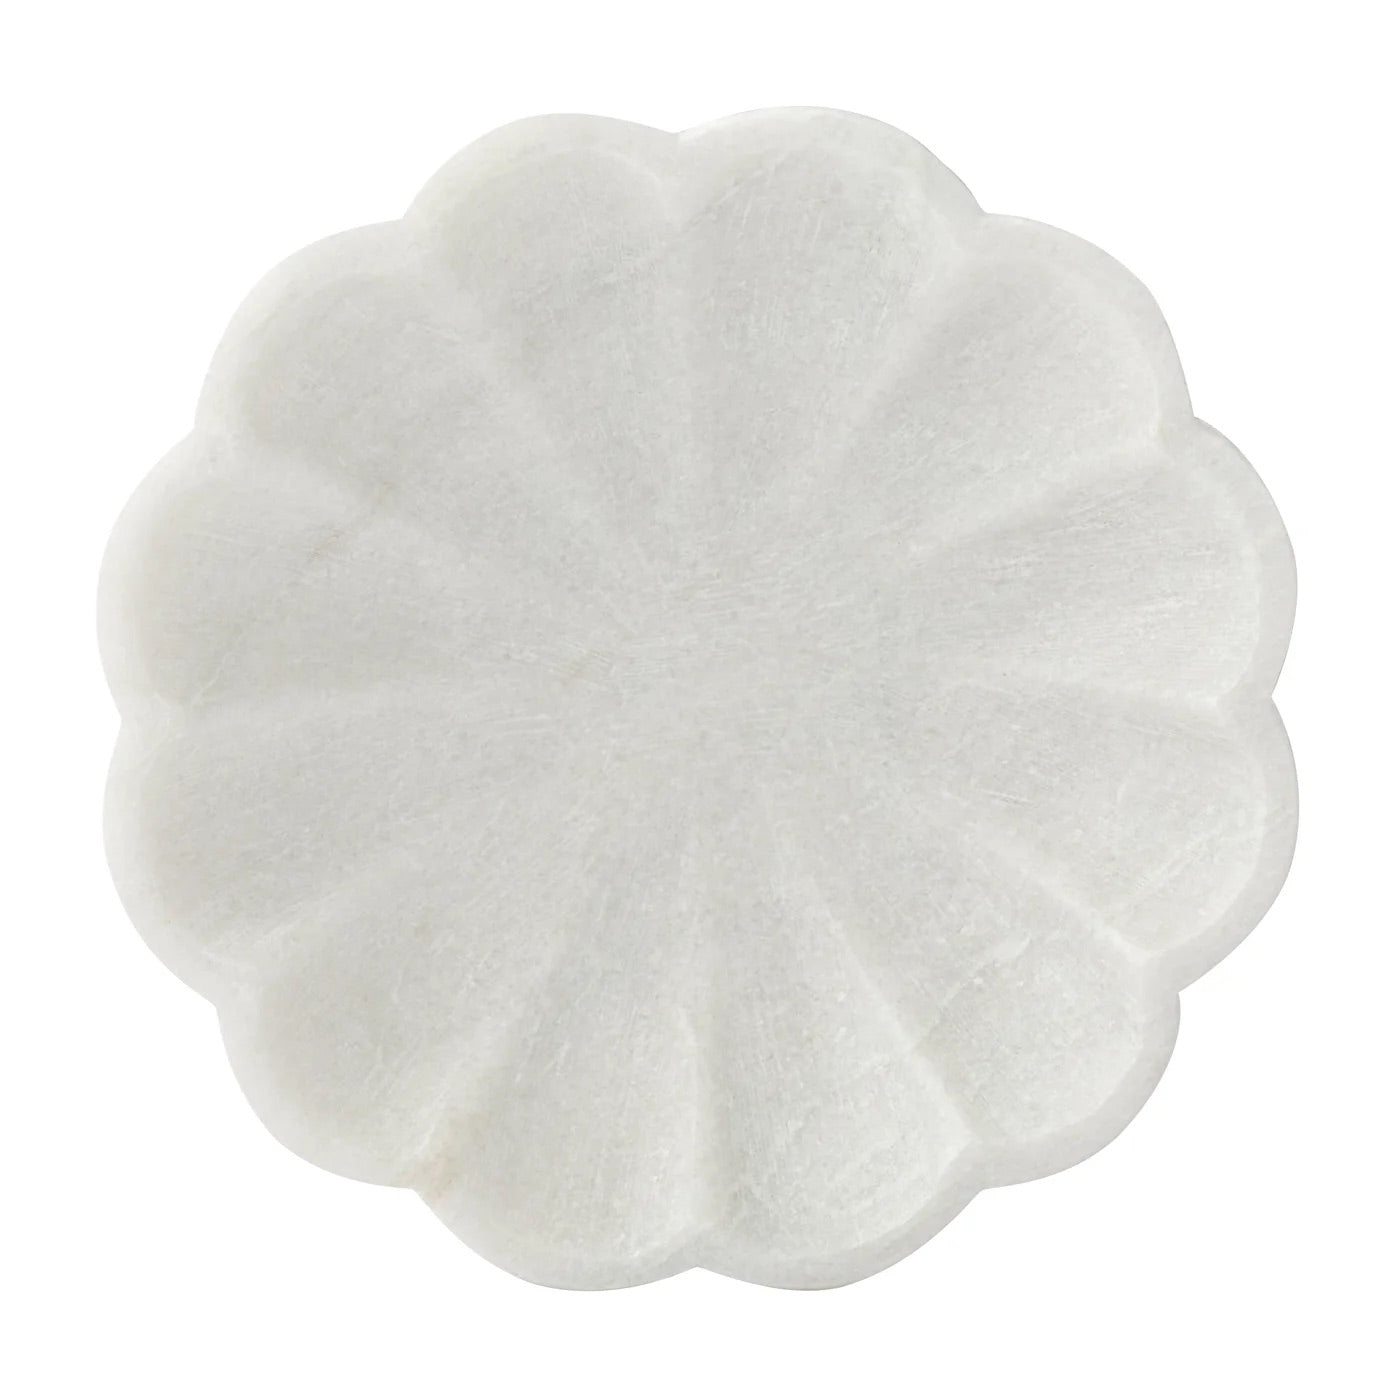 SOAP DISH - MARBLE FLOWER